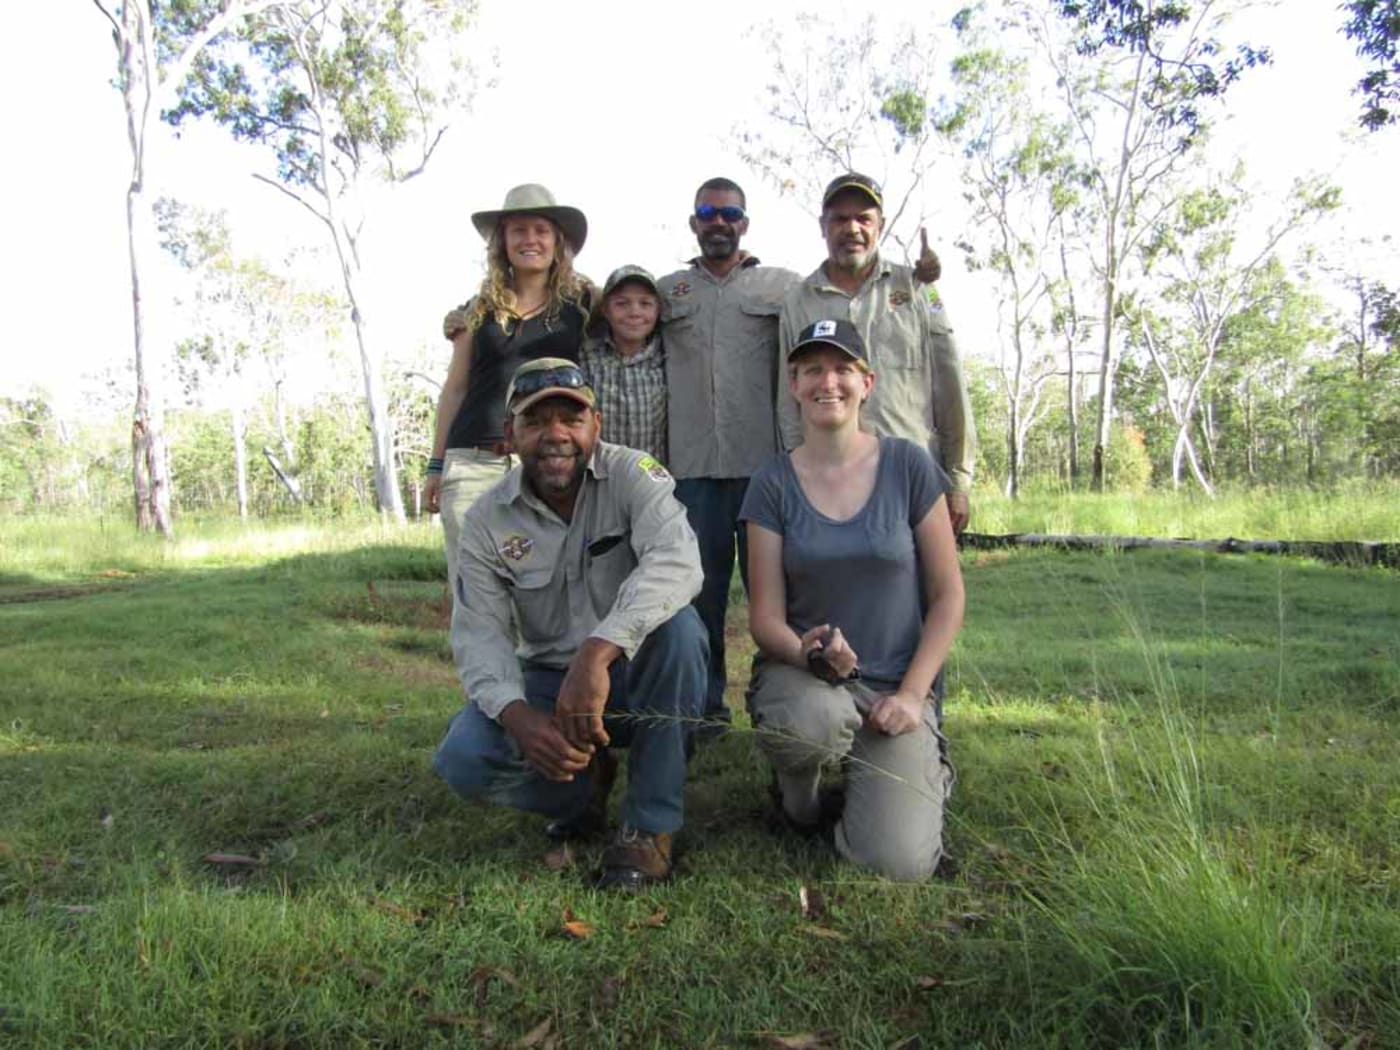 Northern bettong discovery team